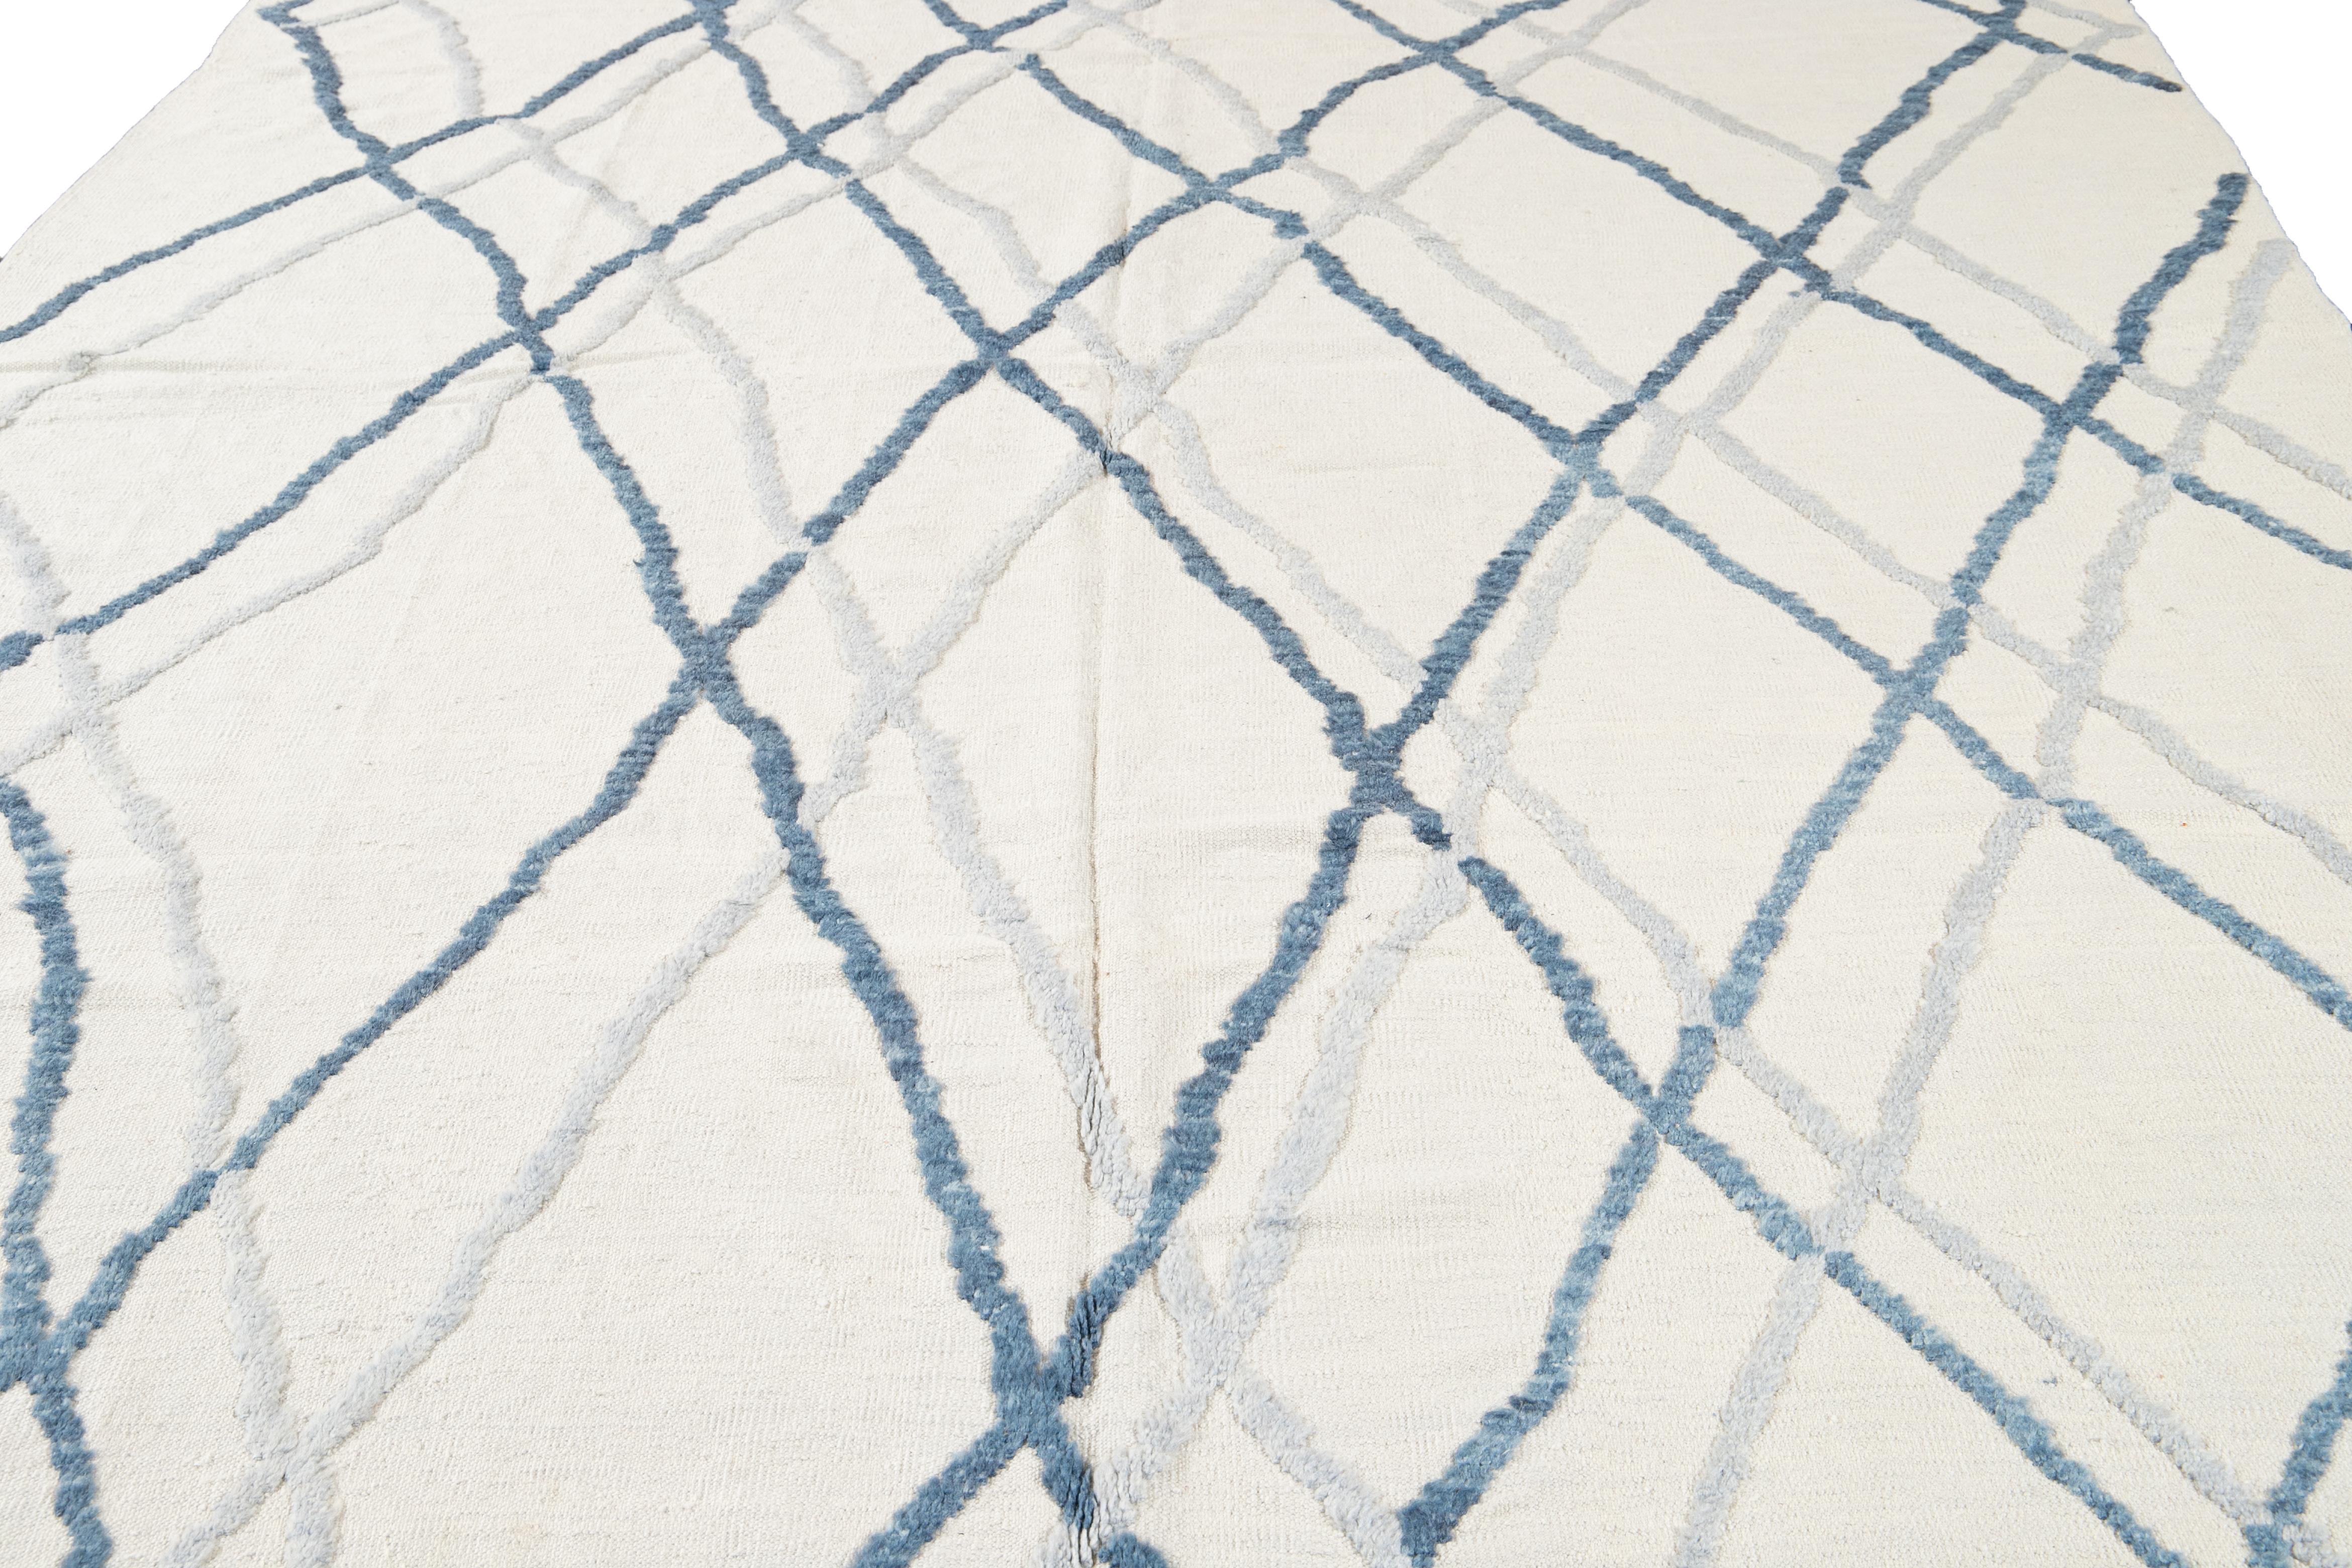 The mesmerizing Moroccan pattern showcased on this hand-knotted wool rug exudes a contemporary allure in blue hues with a captivating ivory background. Its visually stunning Tribal design creates a captivating contrast, perfectly complementing any